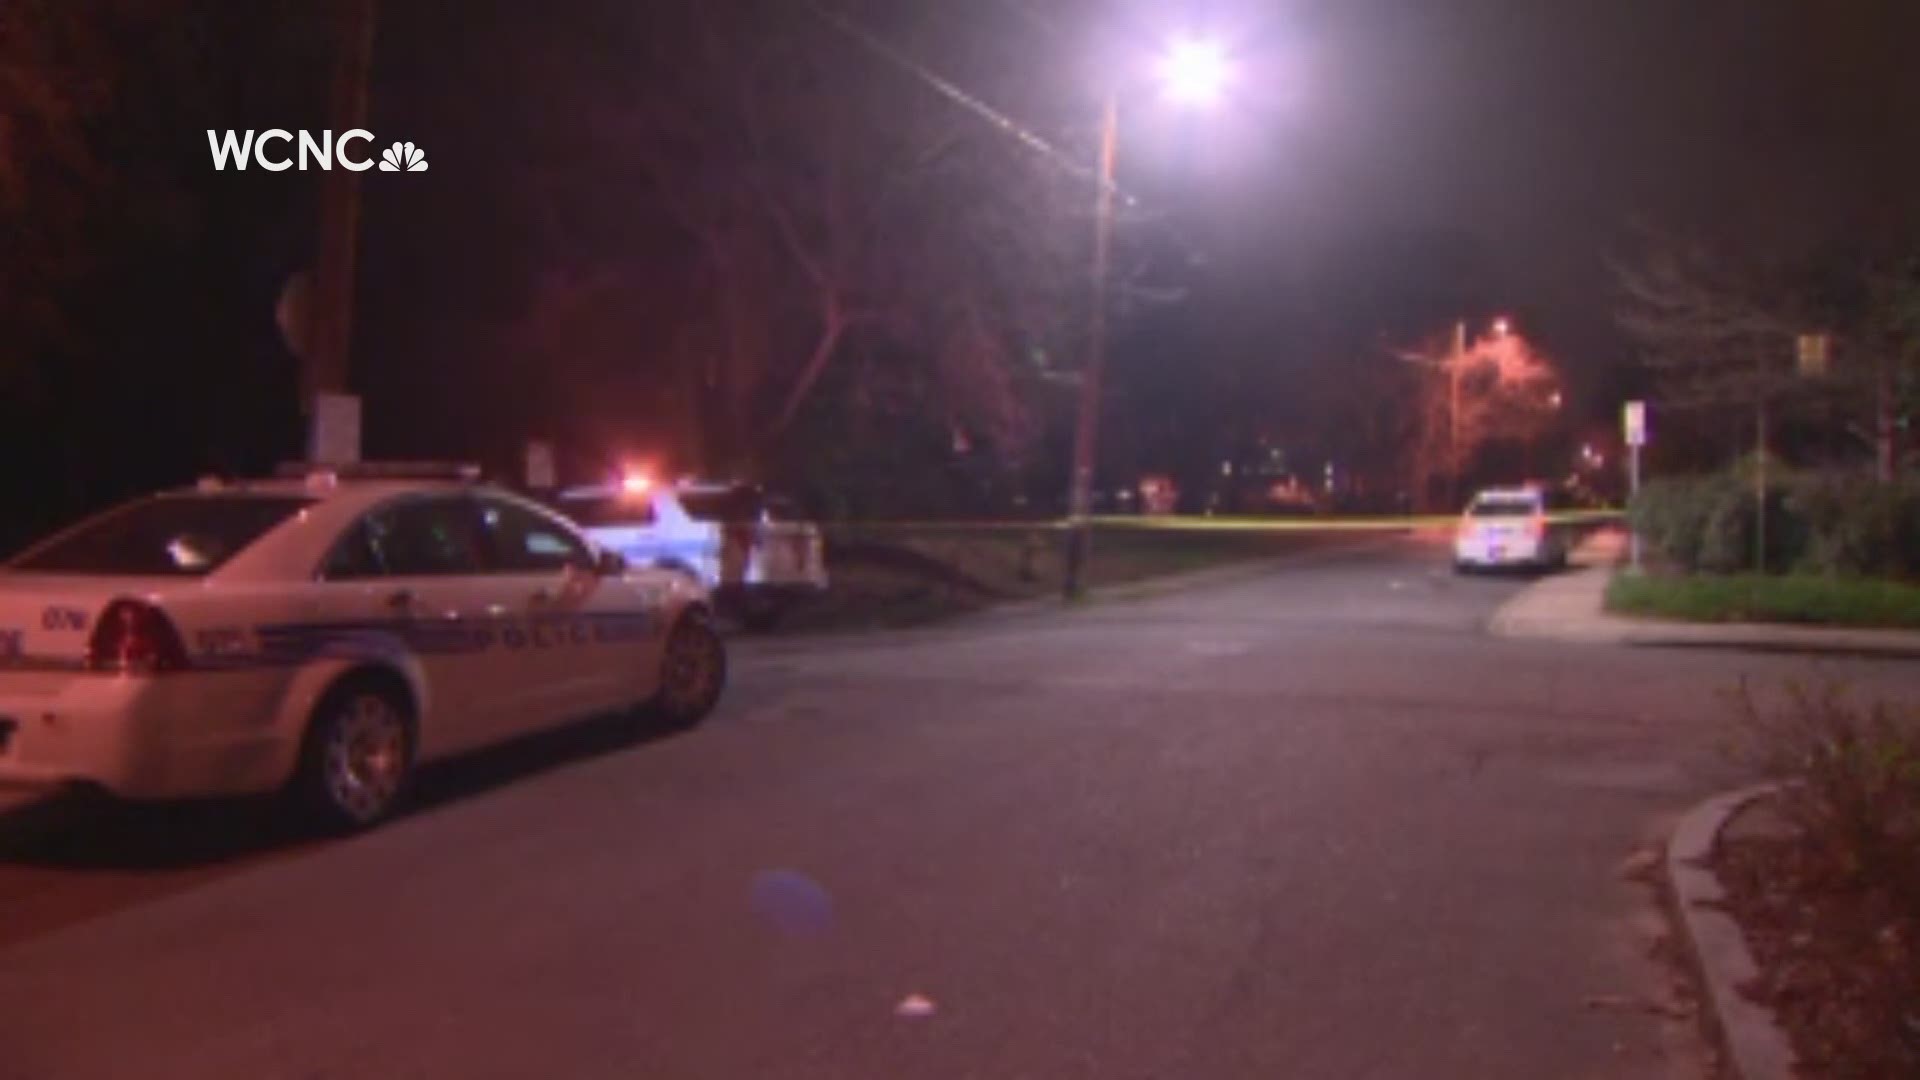 CMPD is investigating  after a man was shot multiple times near uptown Charlotte Friday night.